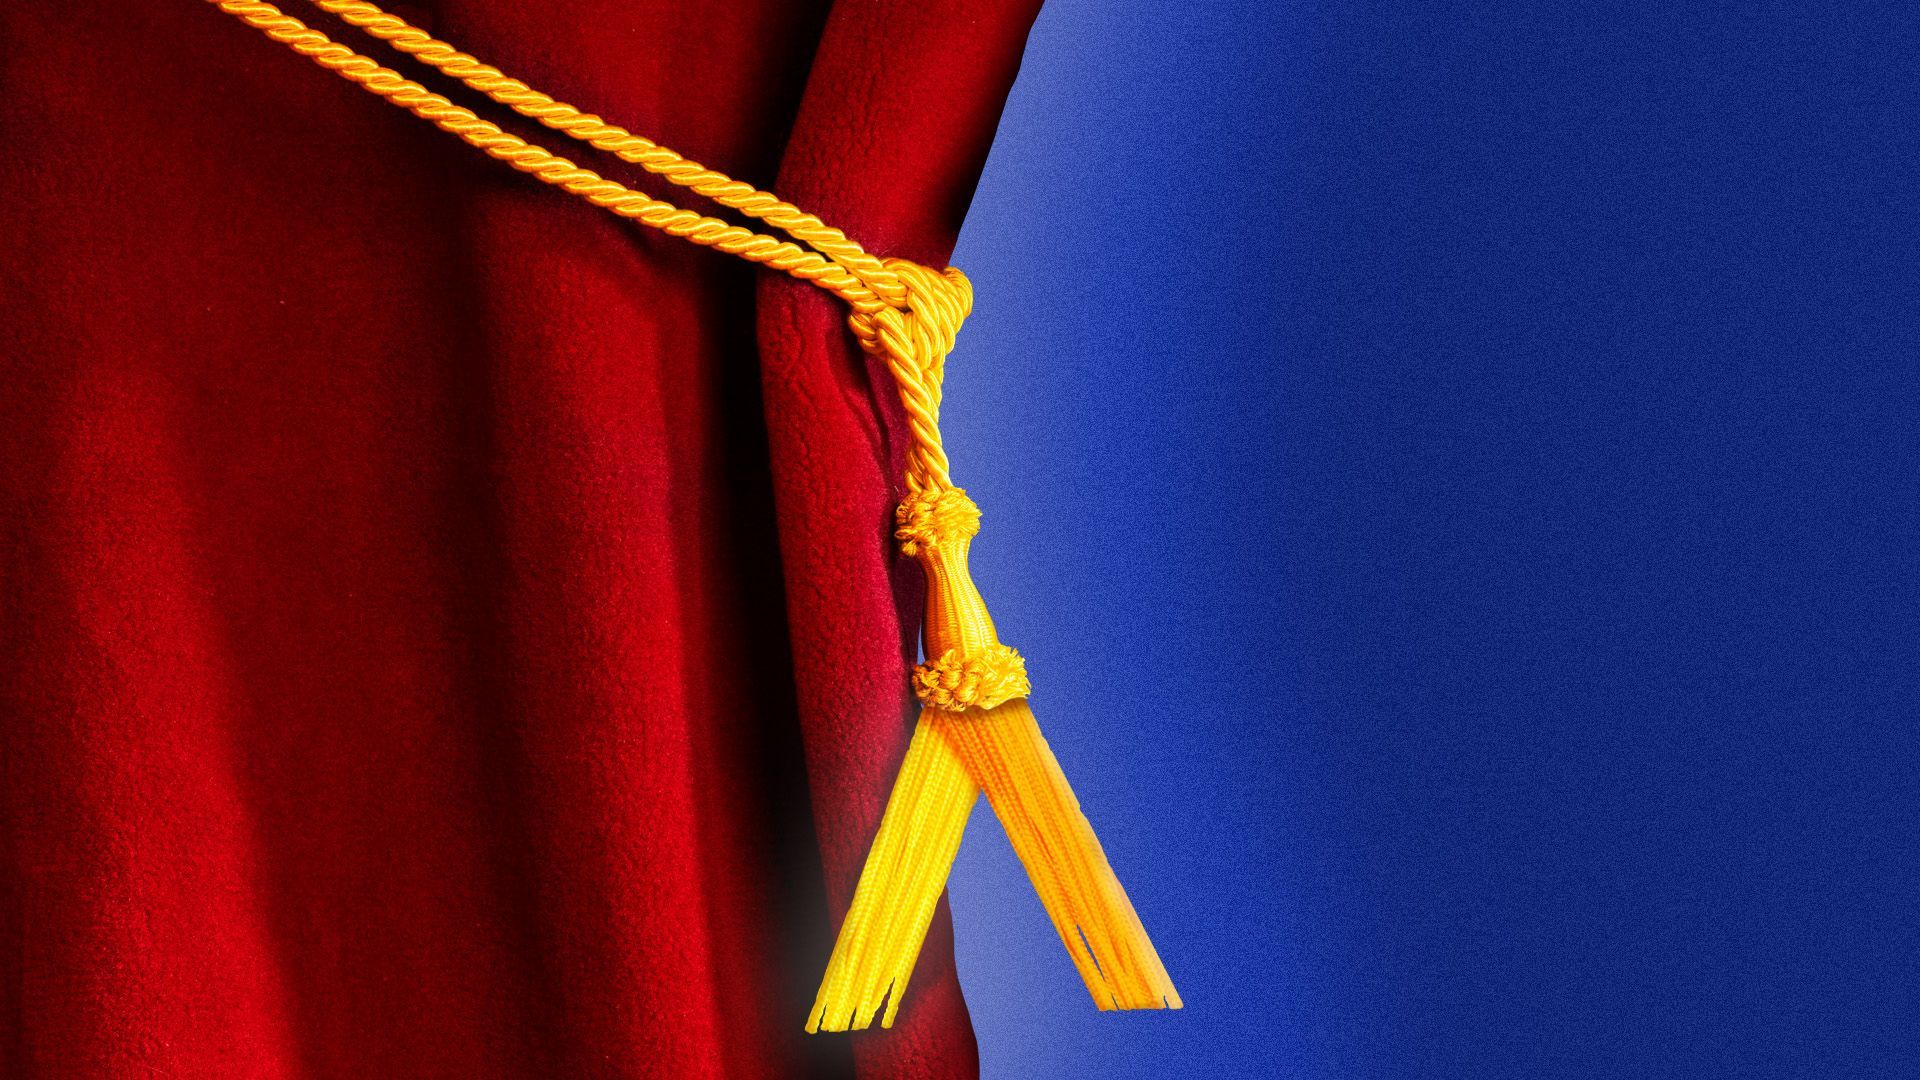 Illustration of a curtain with a tassel in the shape of the Axios logo